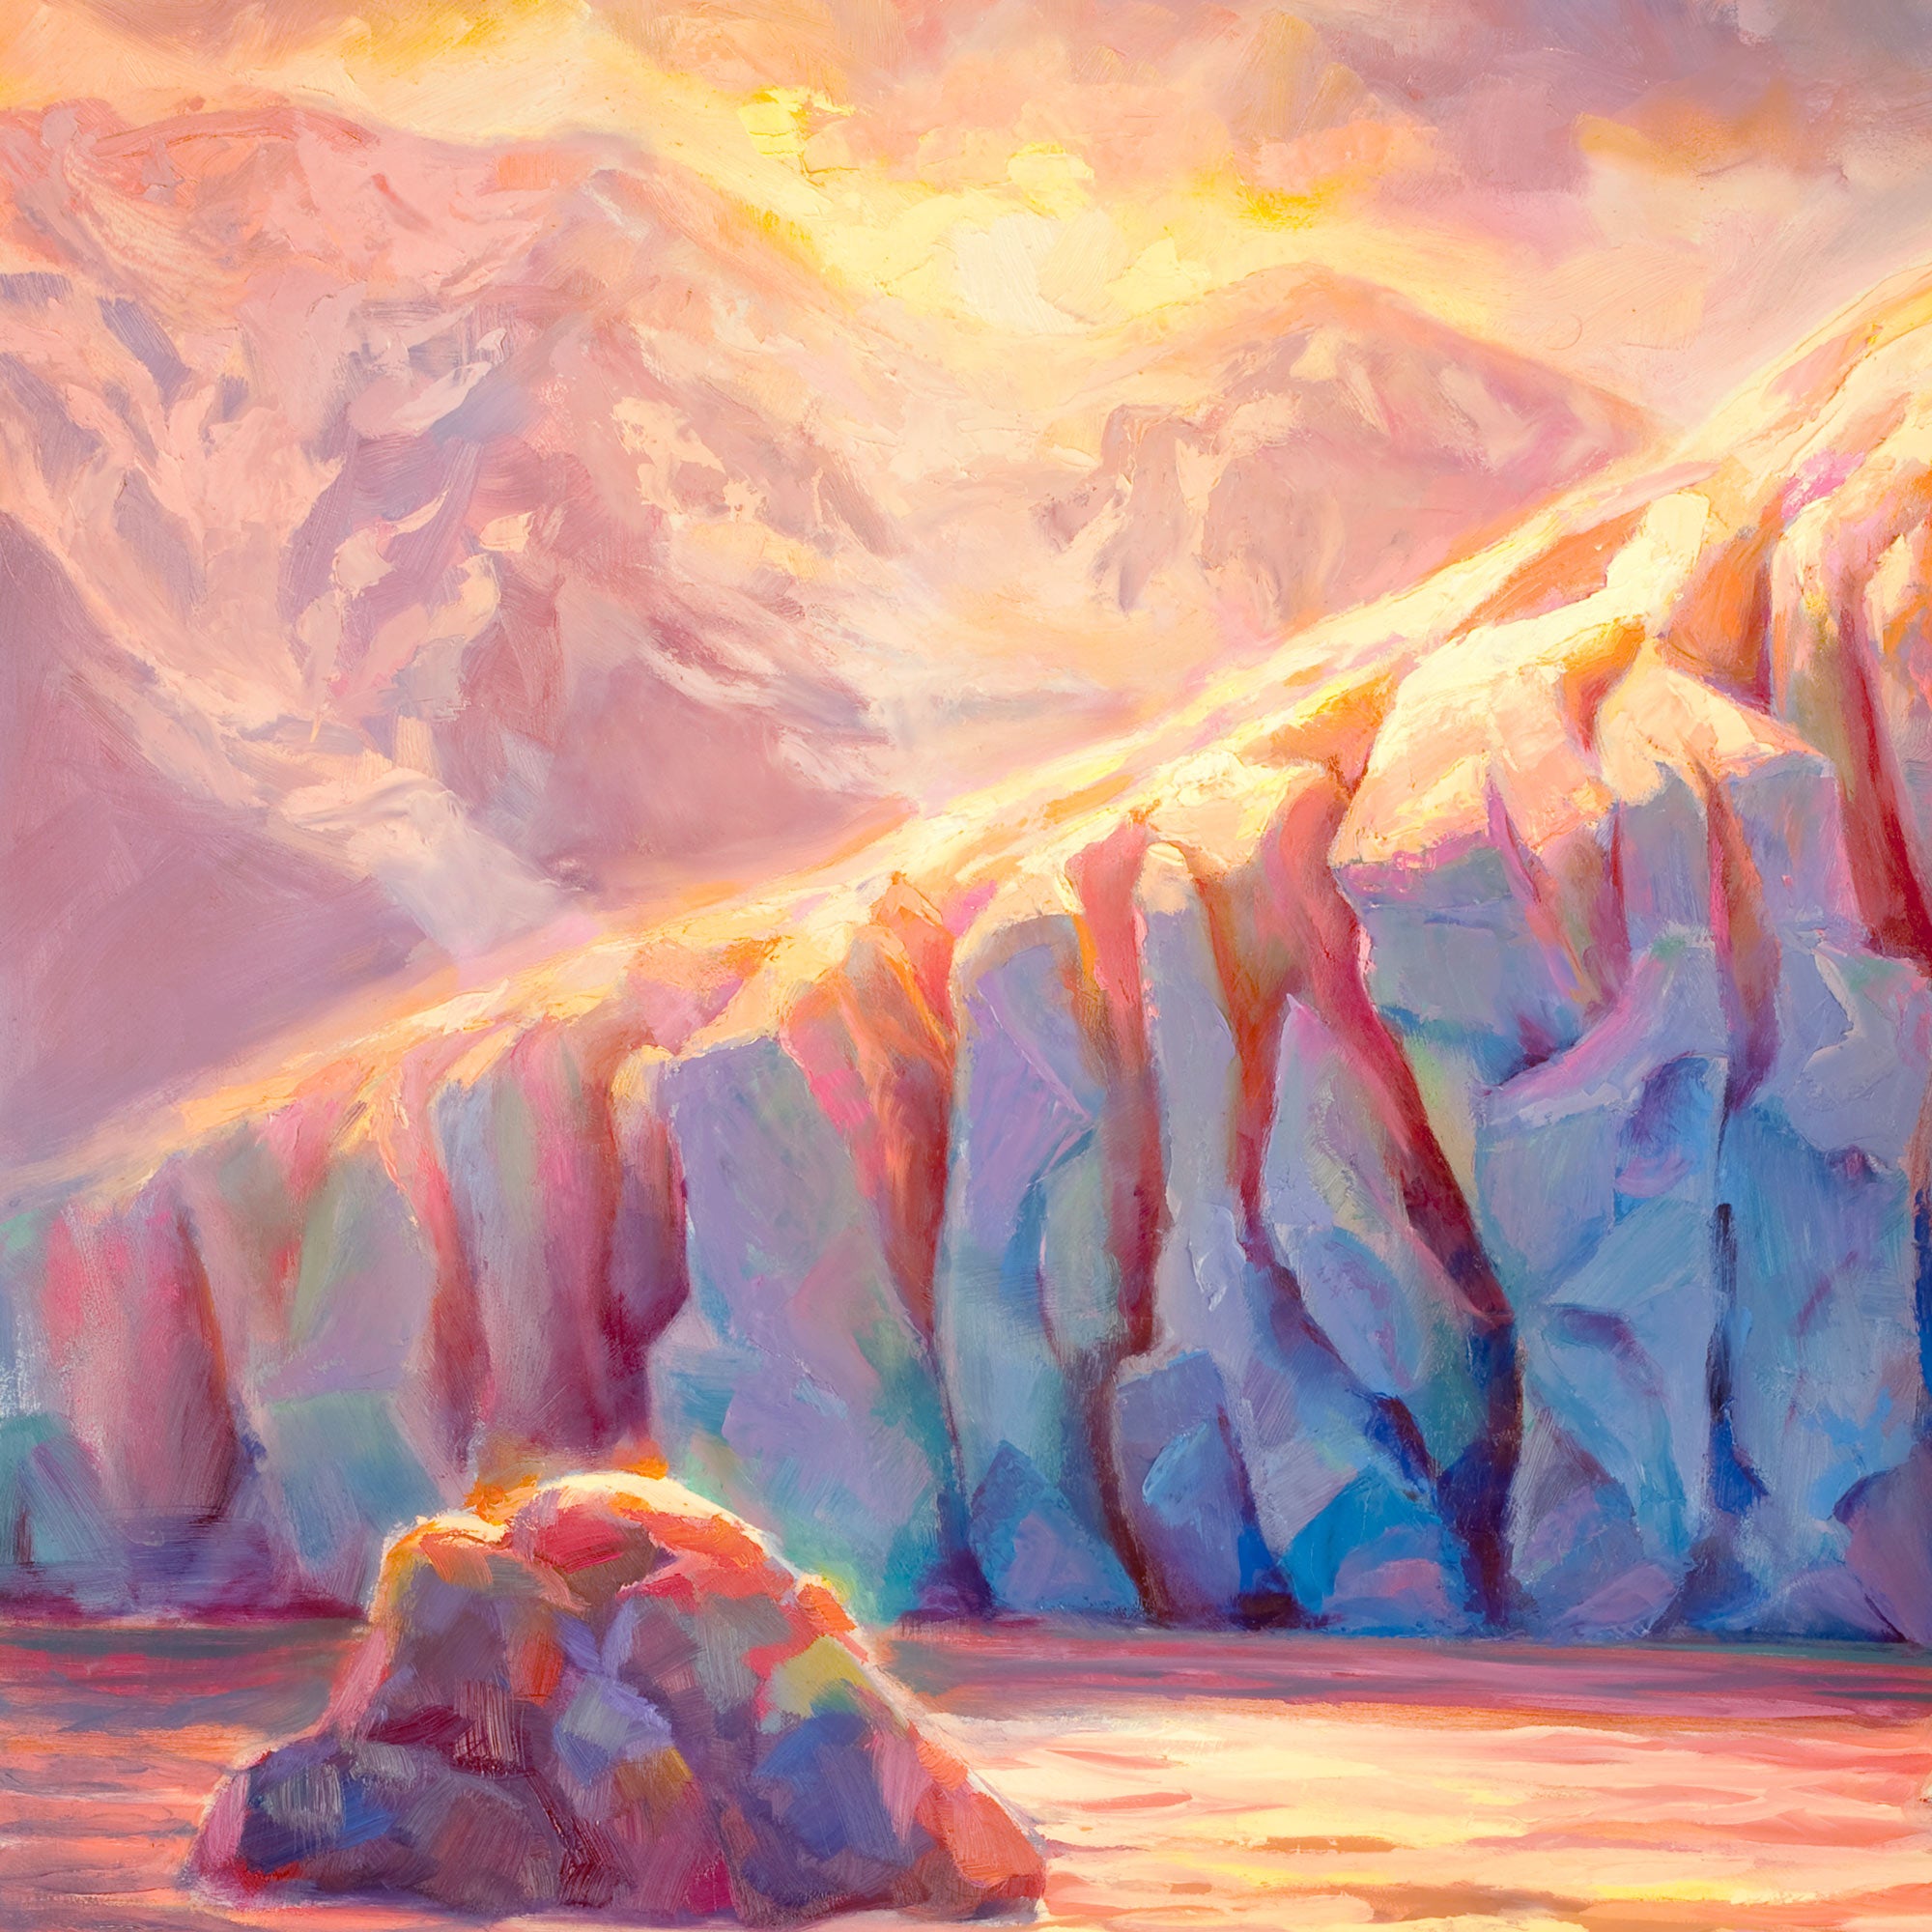 A coloful Alaska painting of a glacier and mountains at sunrise by artist Karen Whitworth